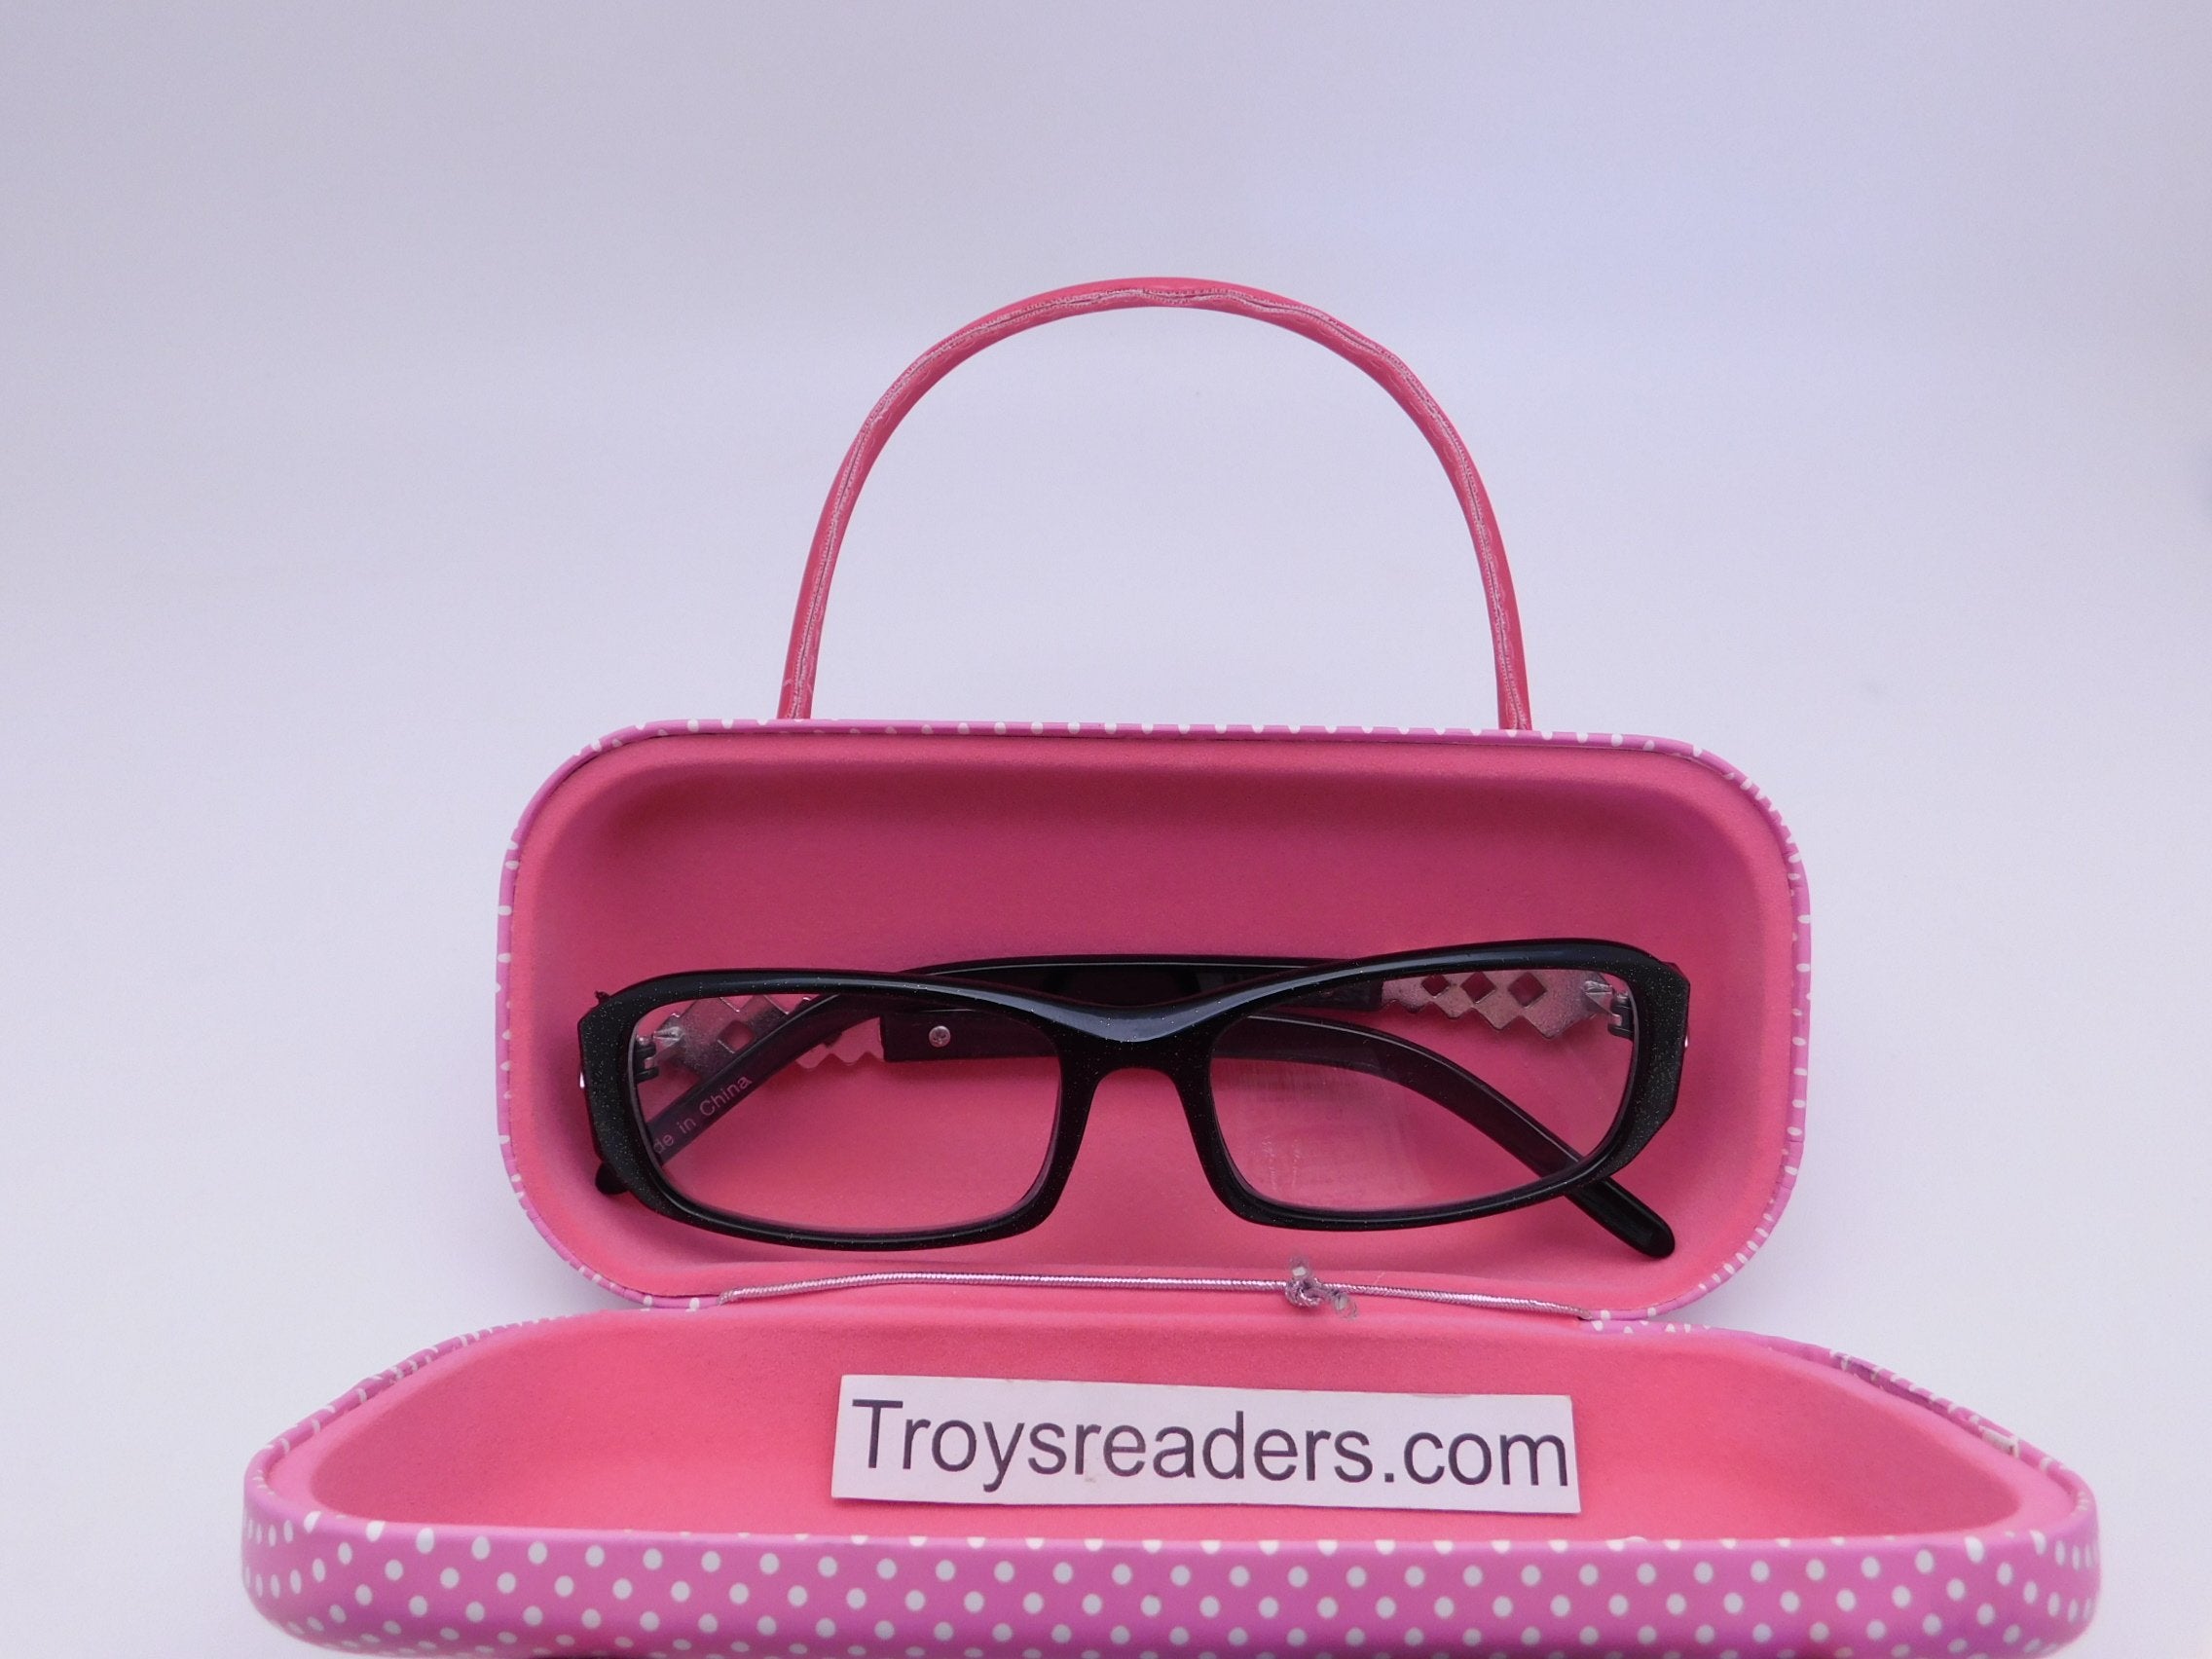 Slim Leather Reading Glasses Case — Troy's Readers